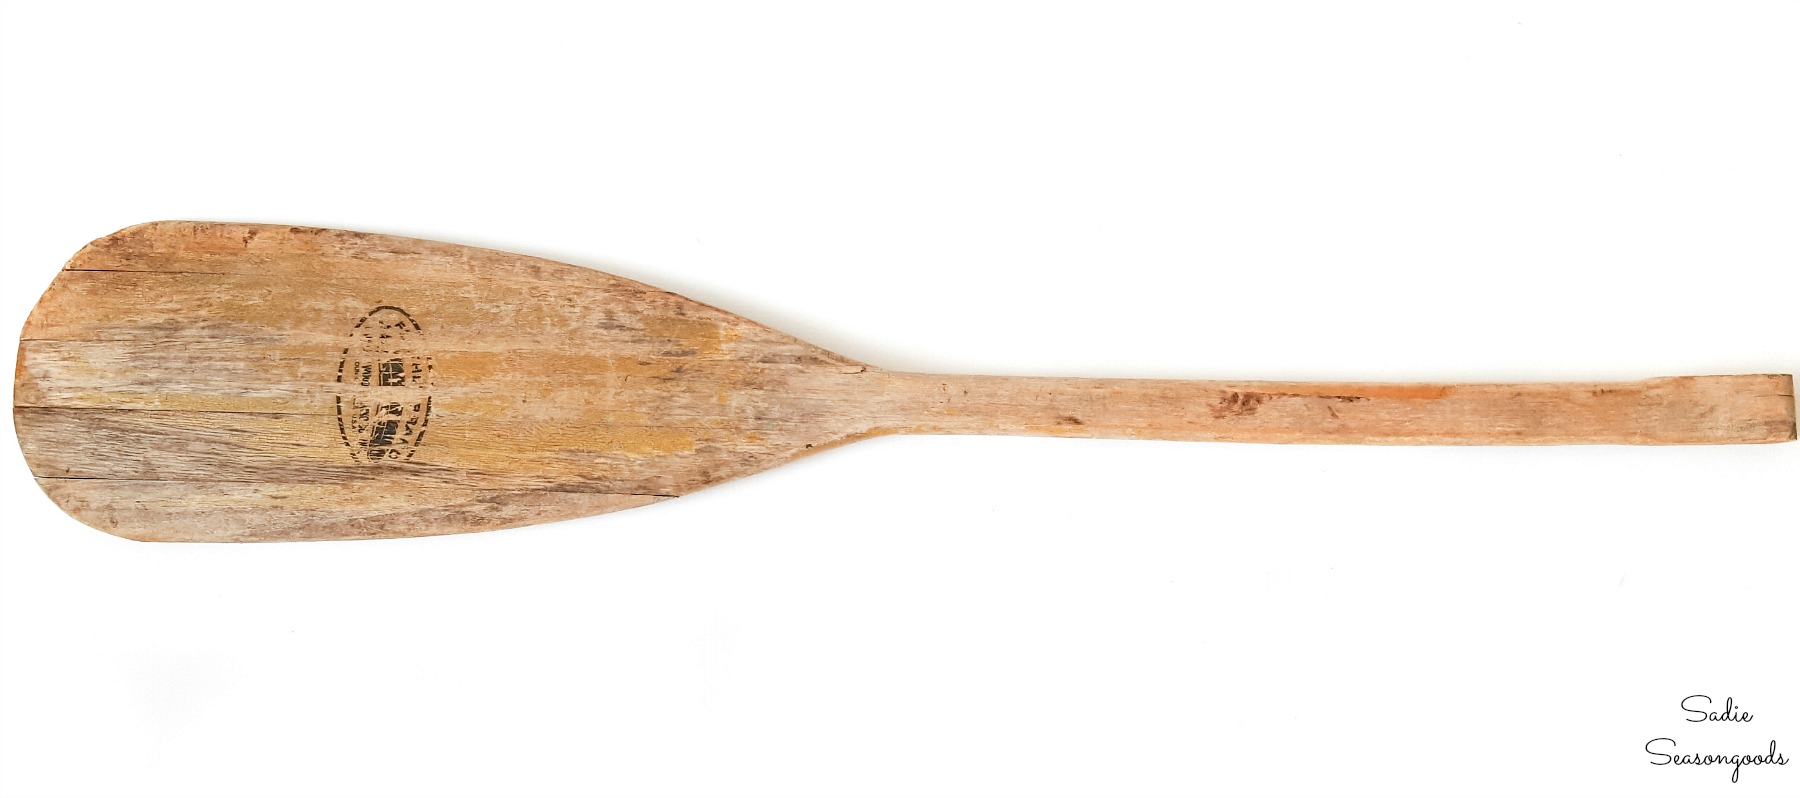 Boat oar or wood paddle that is cracked and needs a makeover